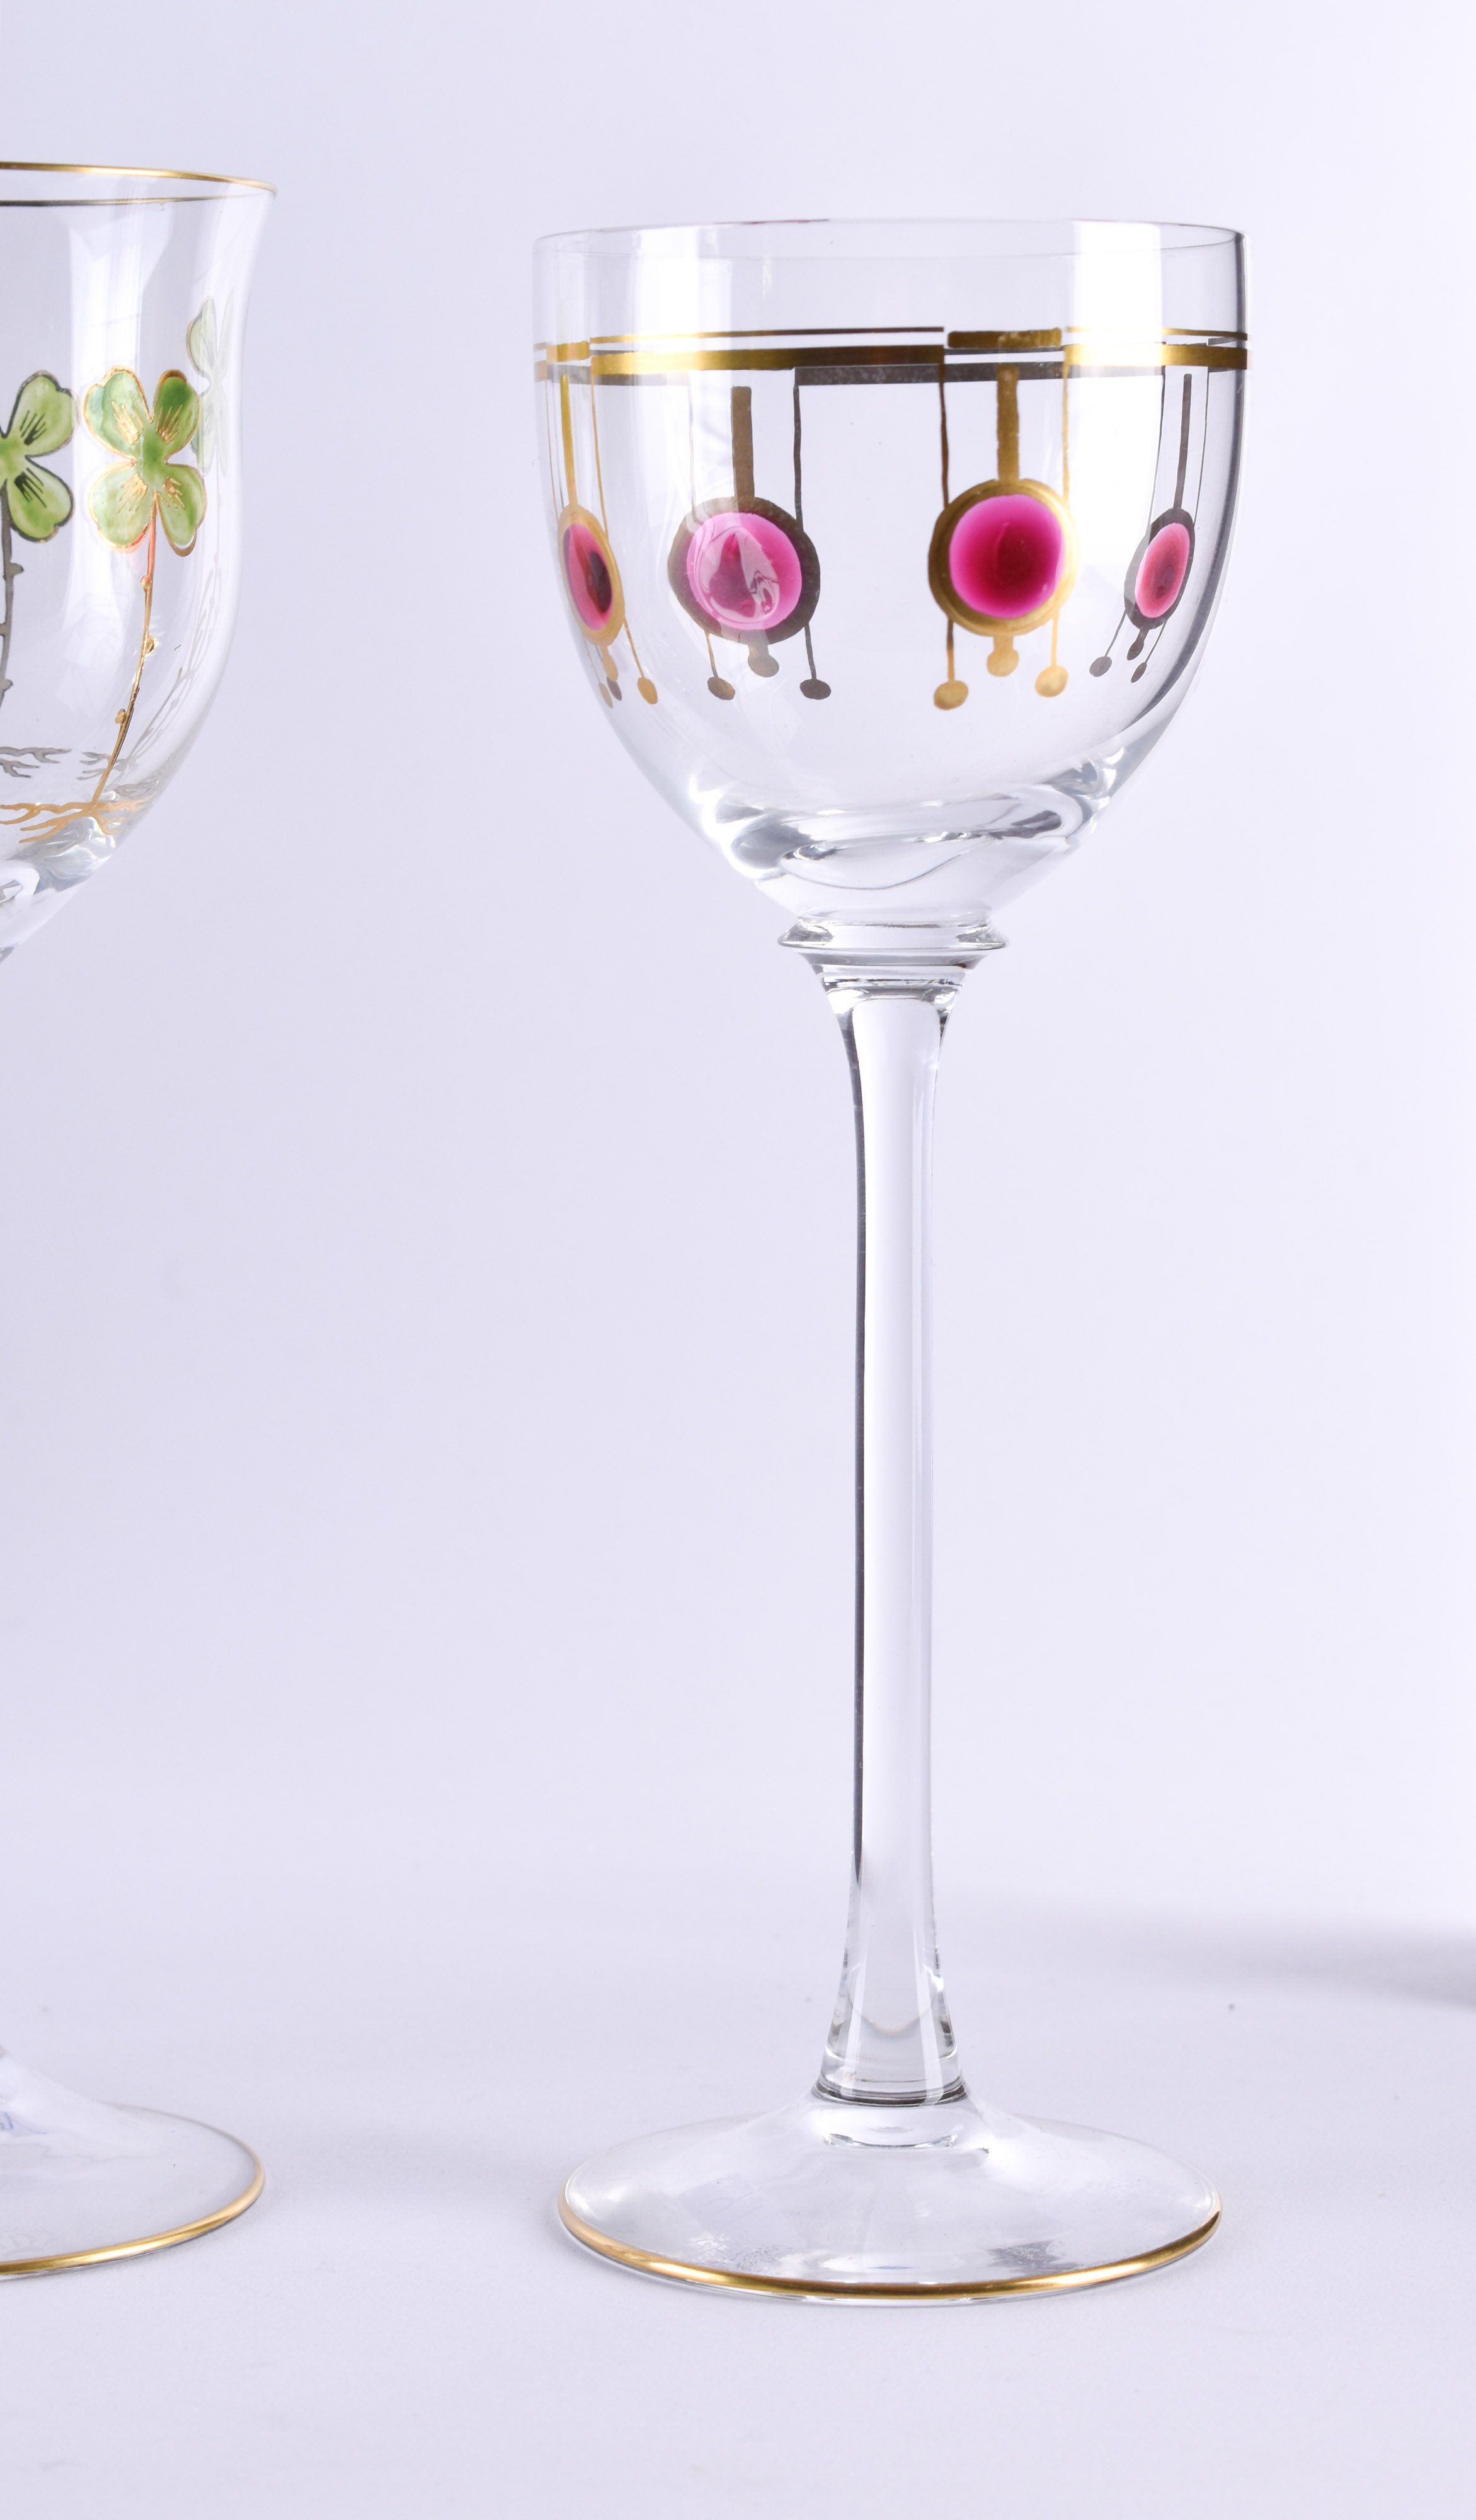 4 Theresienthal wine glasses - Image 4 of 4